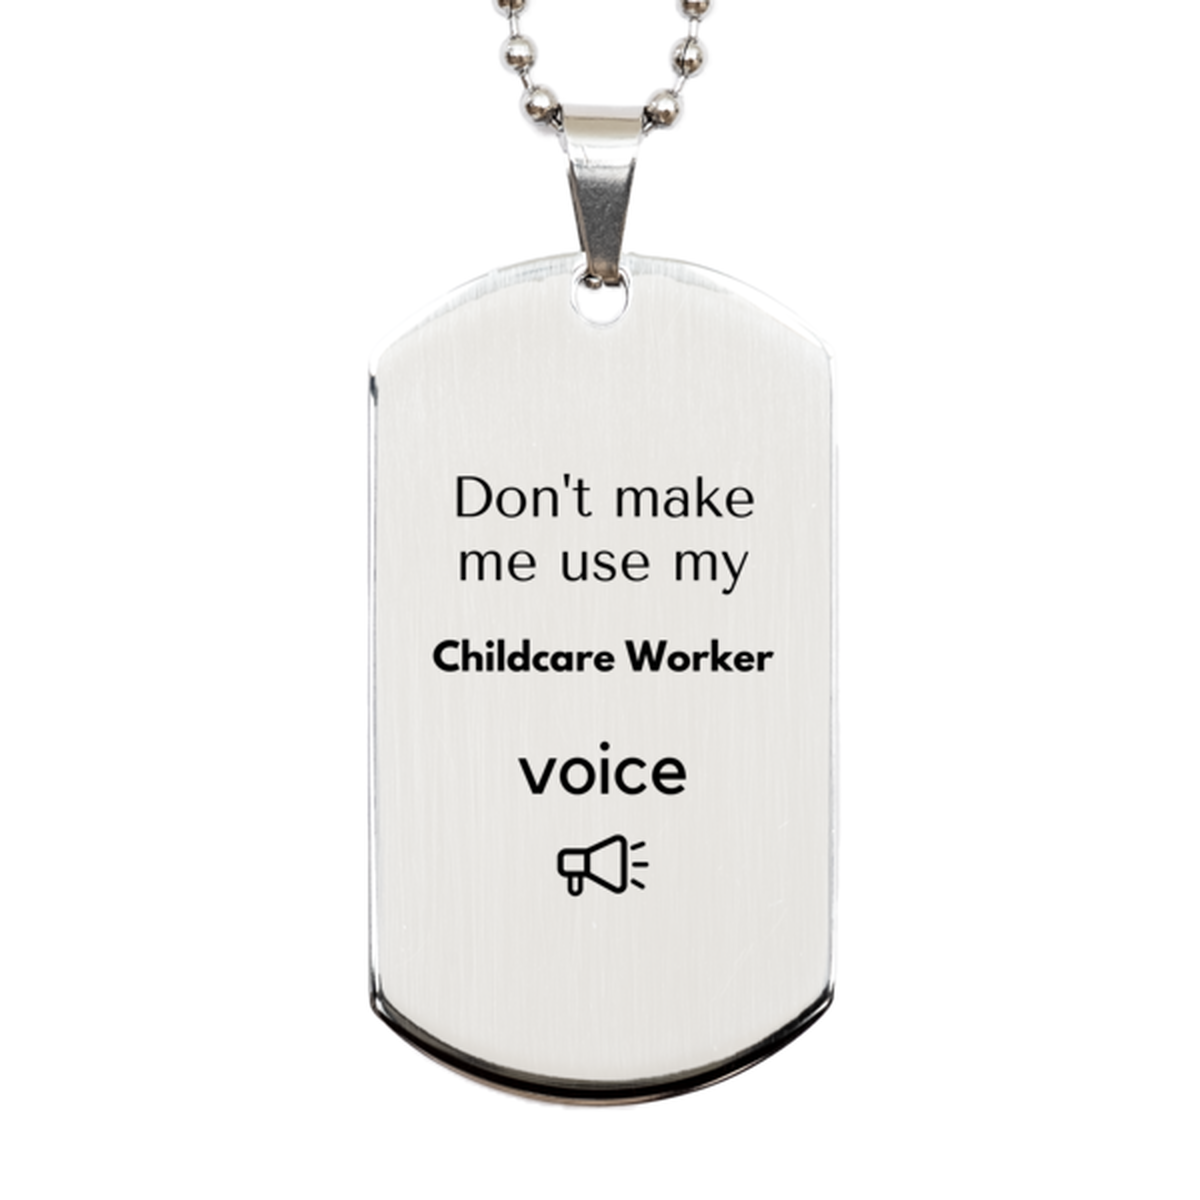 Don't make me use my Childcare Worker voice, Sarcasm Childcare Worker Gifts, Christmas Childcare Worker Silver Dog Tag Birthday Unique Gifts For Childcare Worker Coworkers, Men, Women, Colleague, Friends